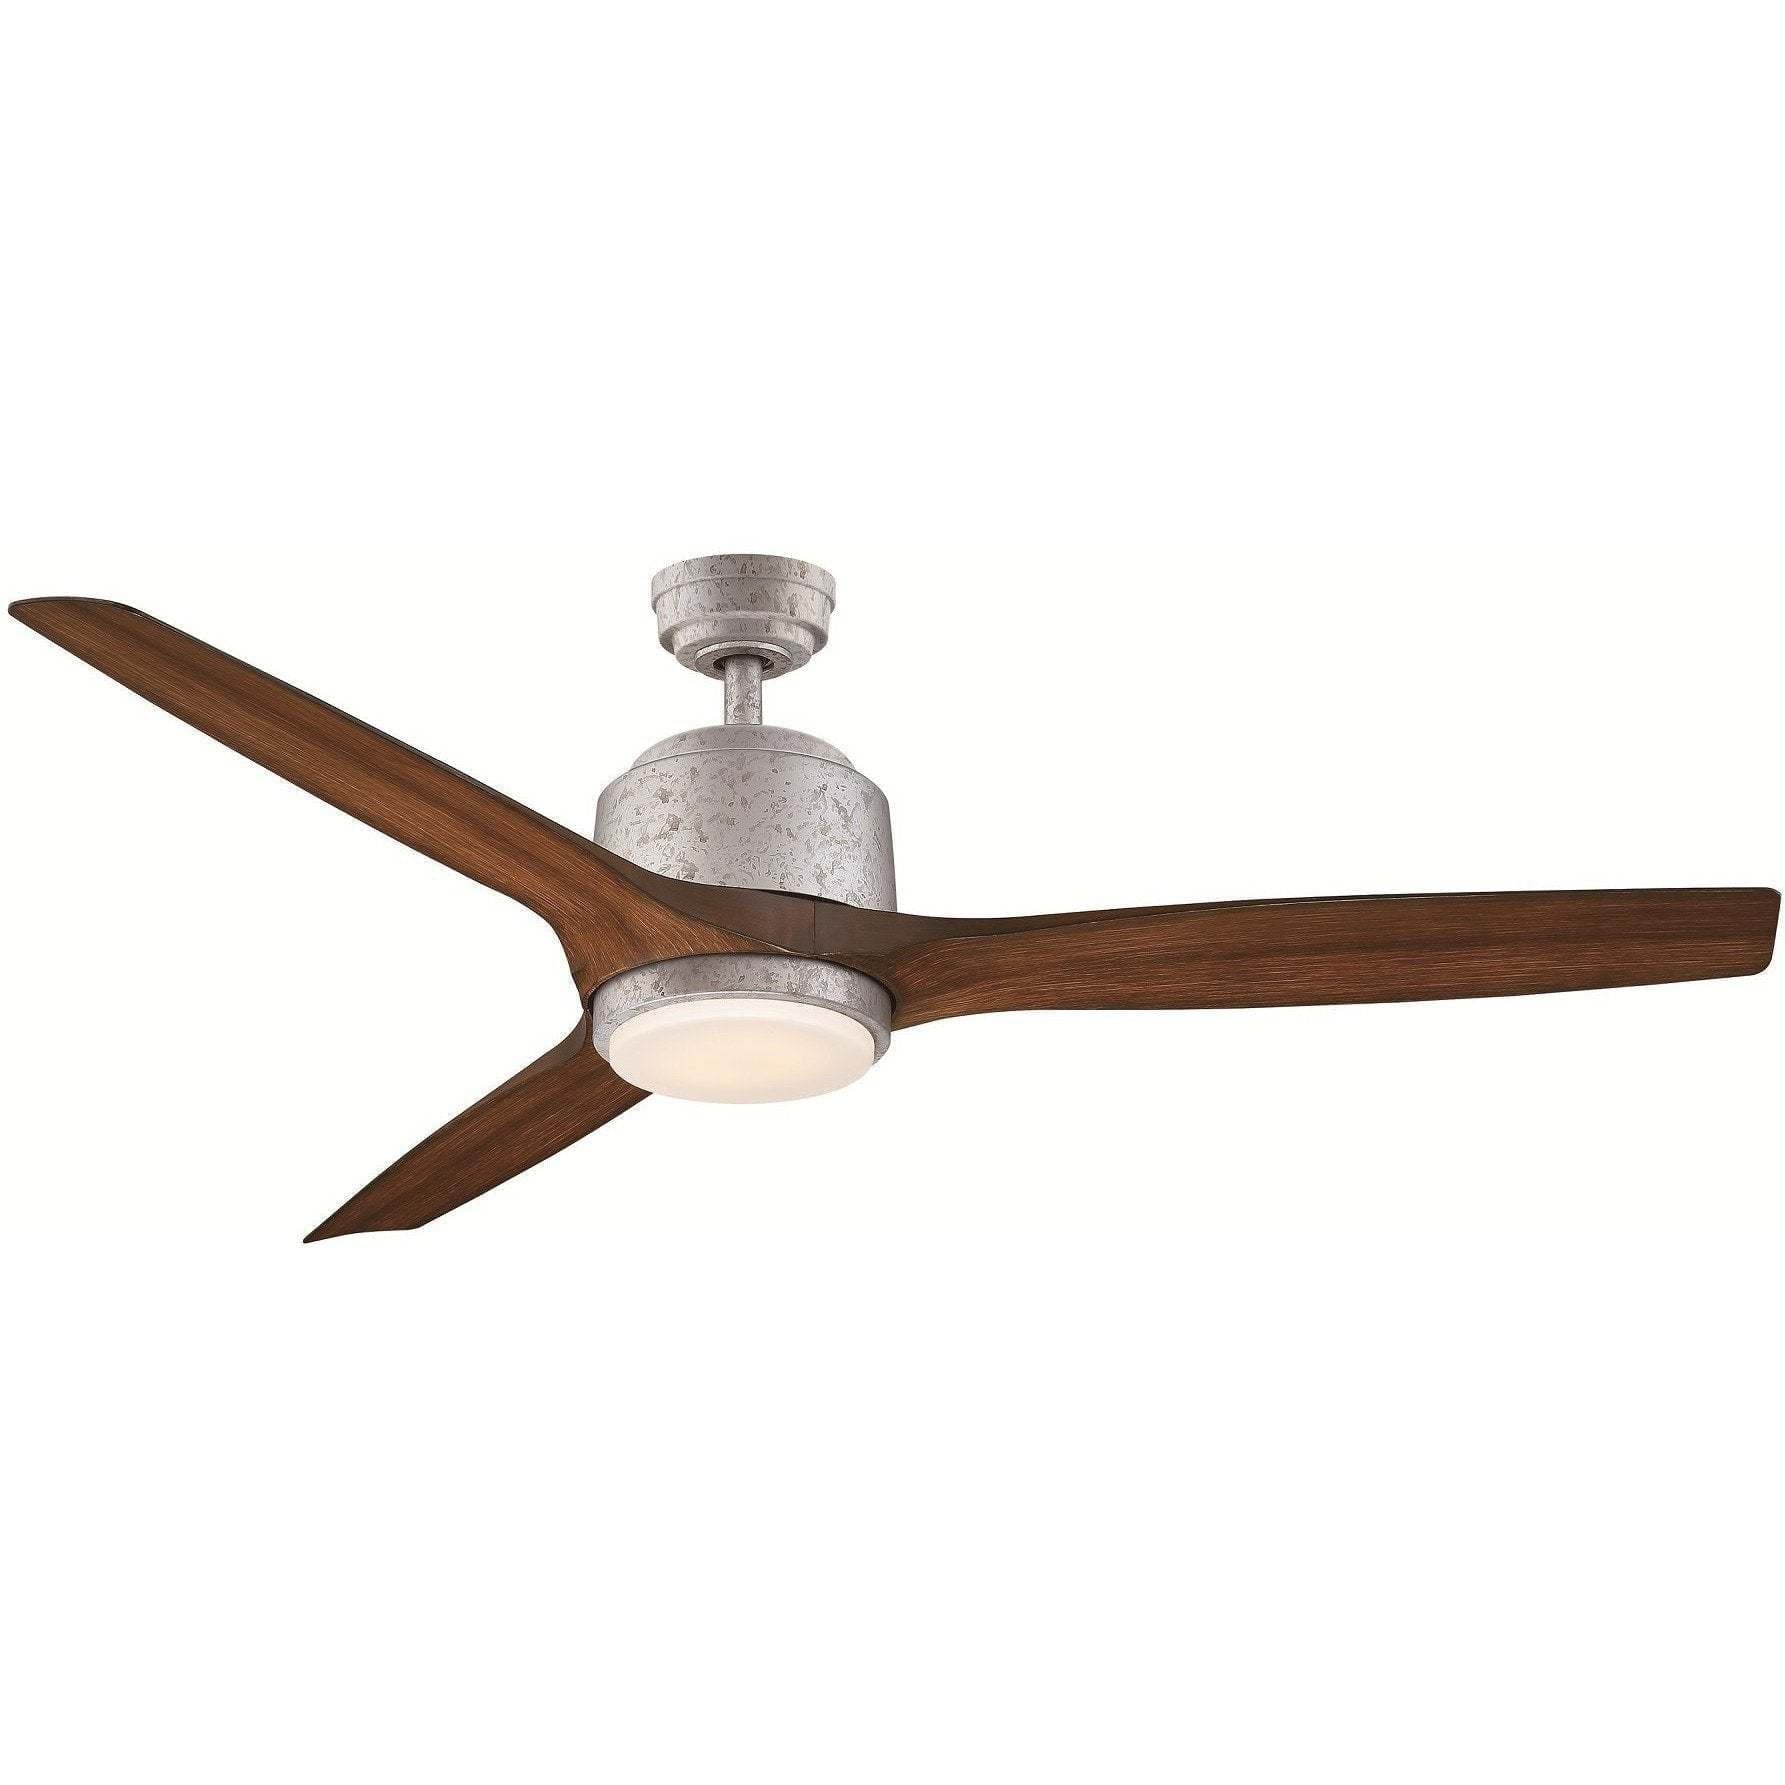 Sora Outdoor 56 Inch Matte Black and Gold Ceiling Fan - Image 1